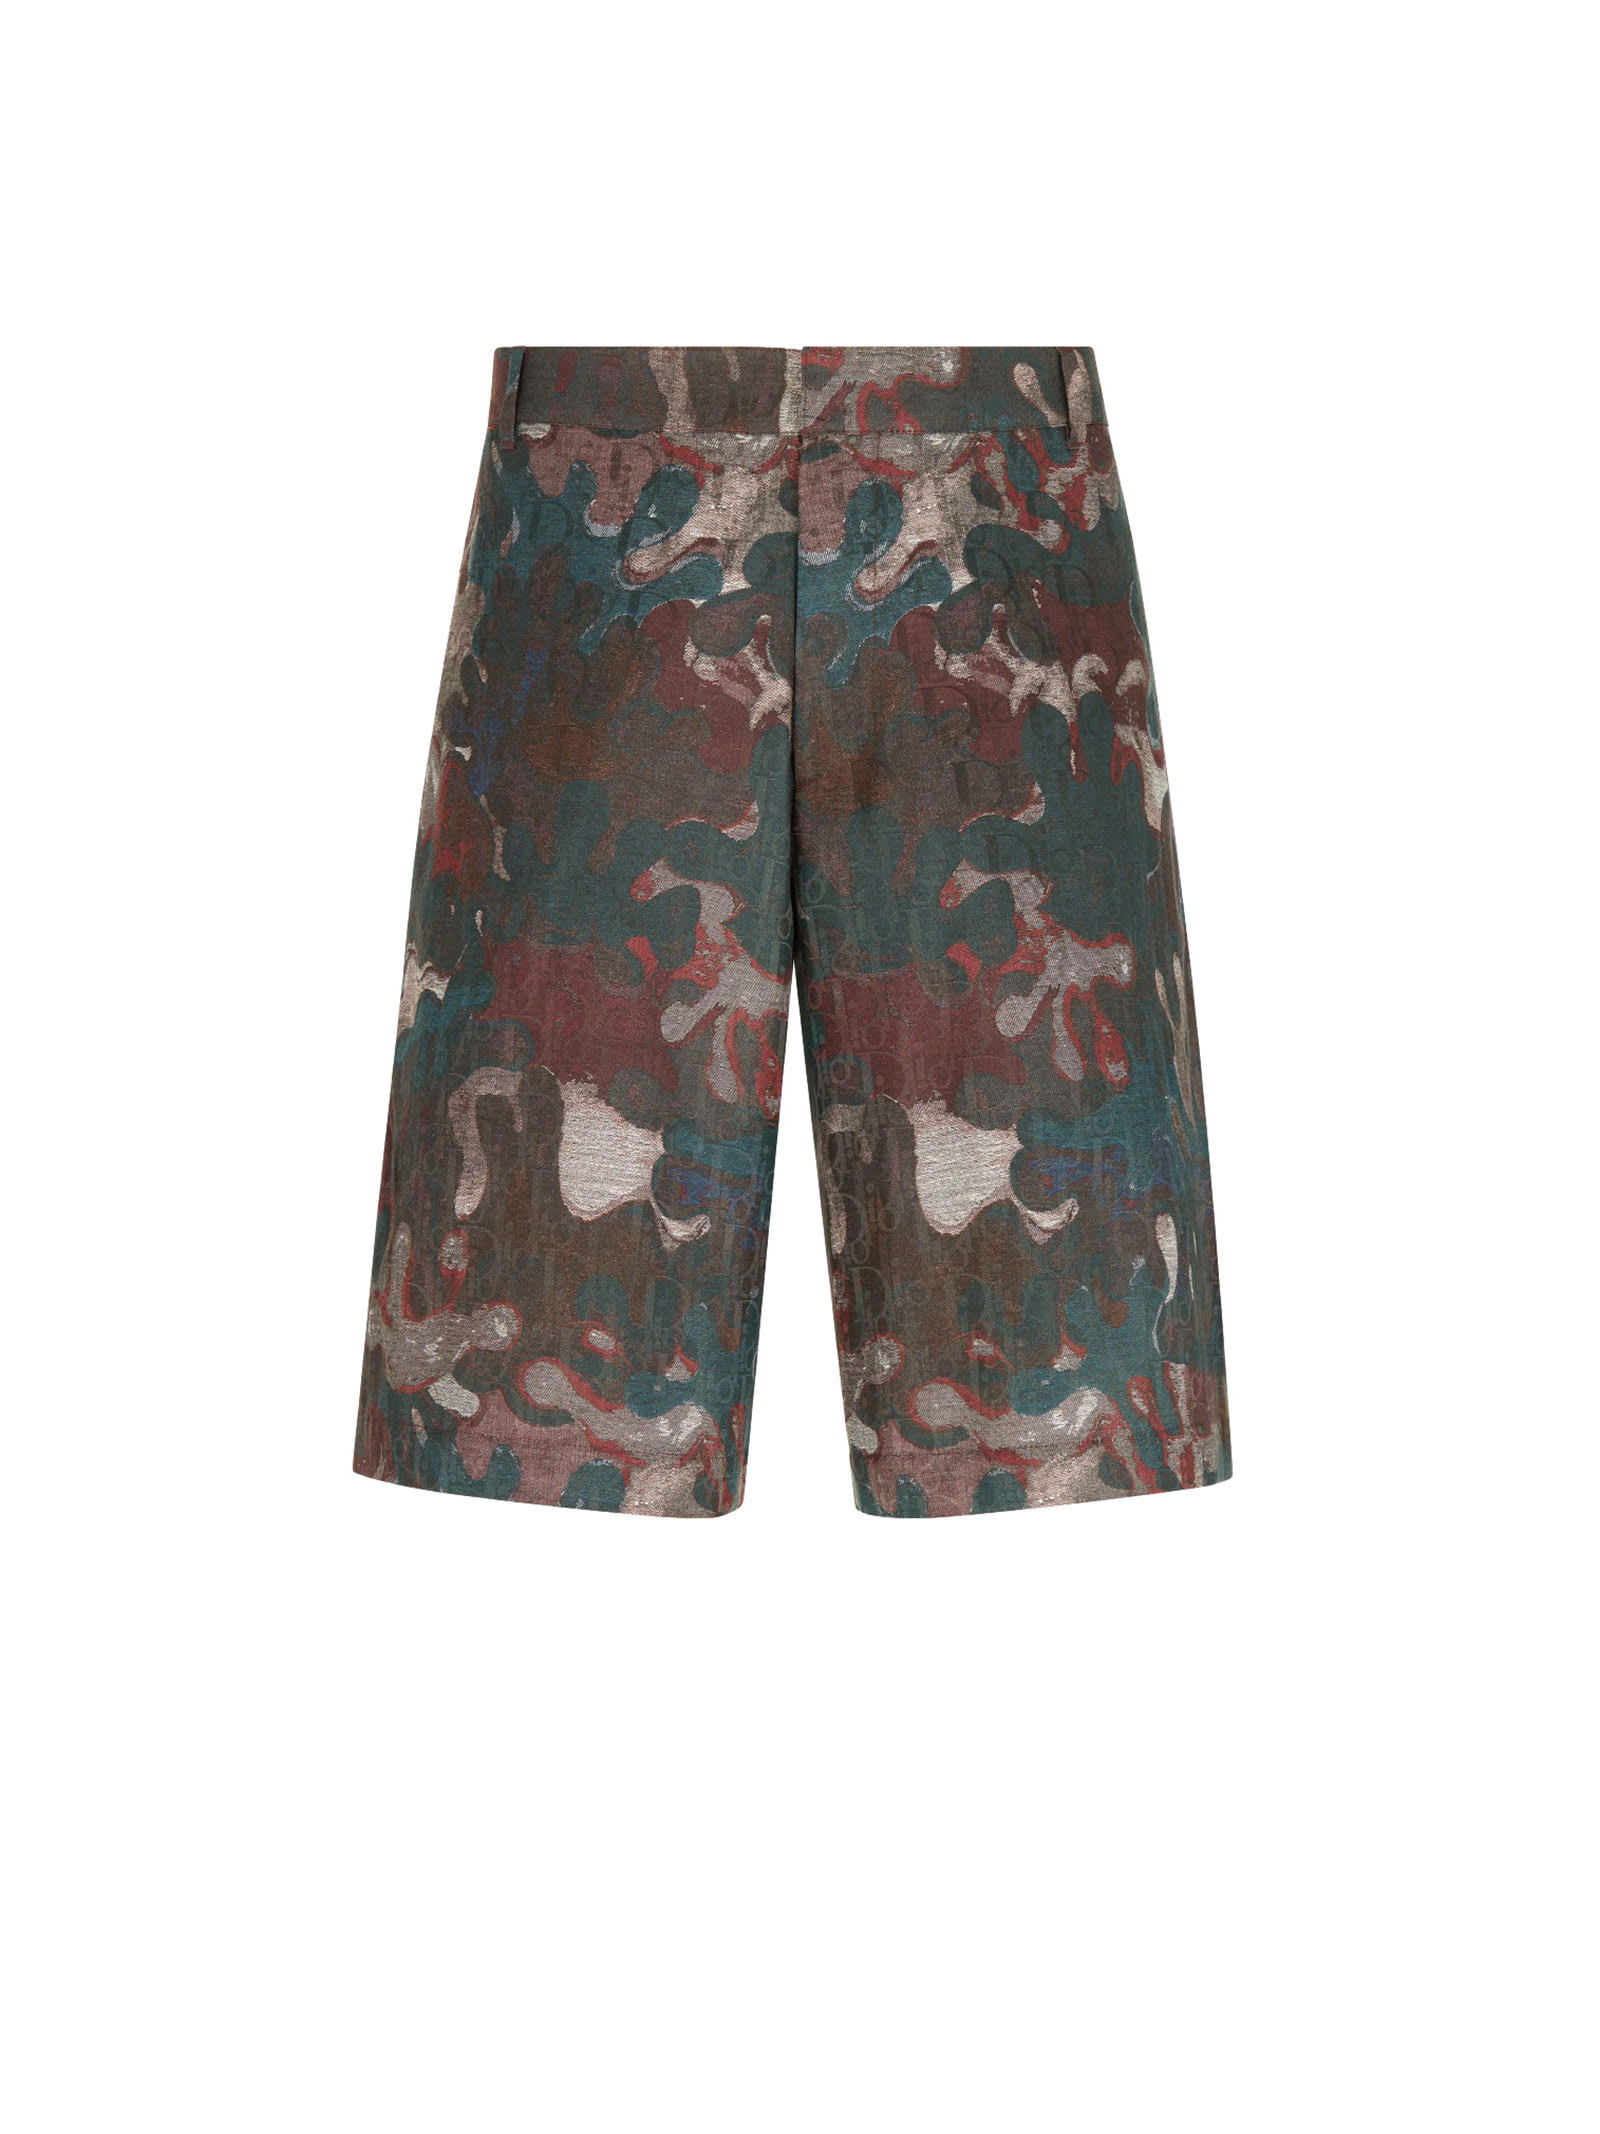 Dior Homme Shorts Camouflage